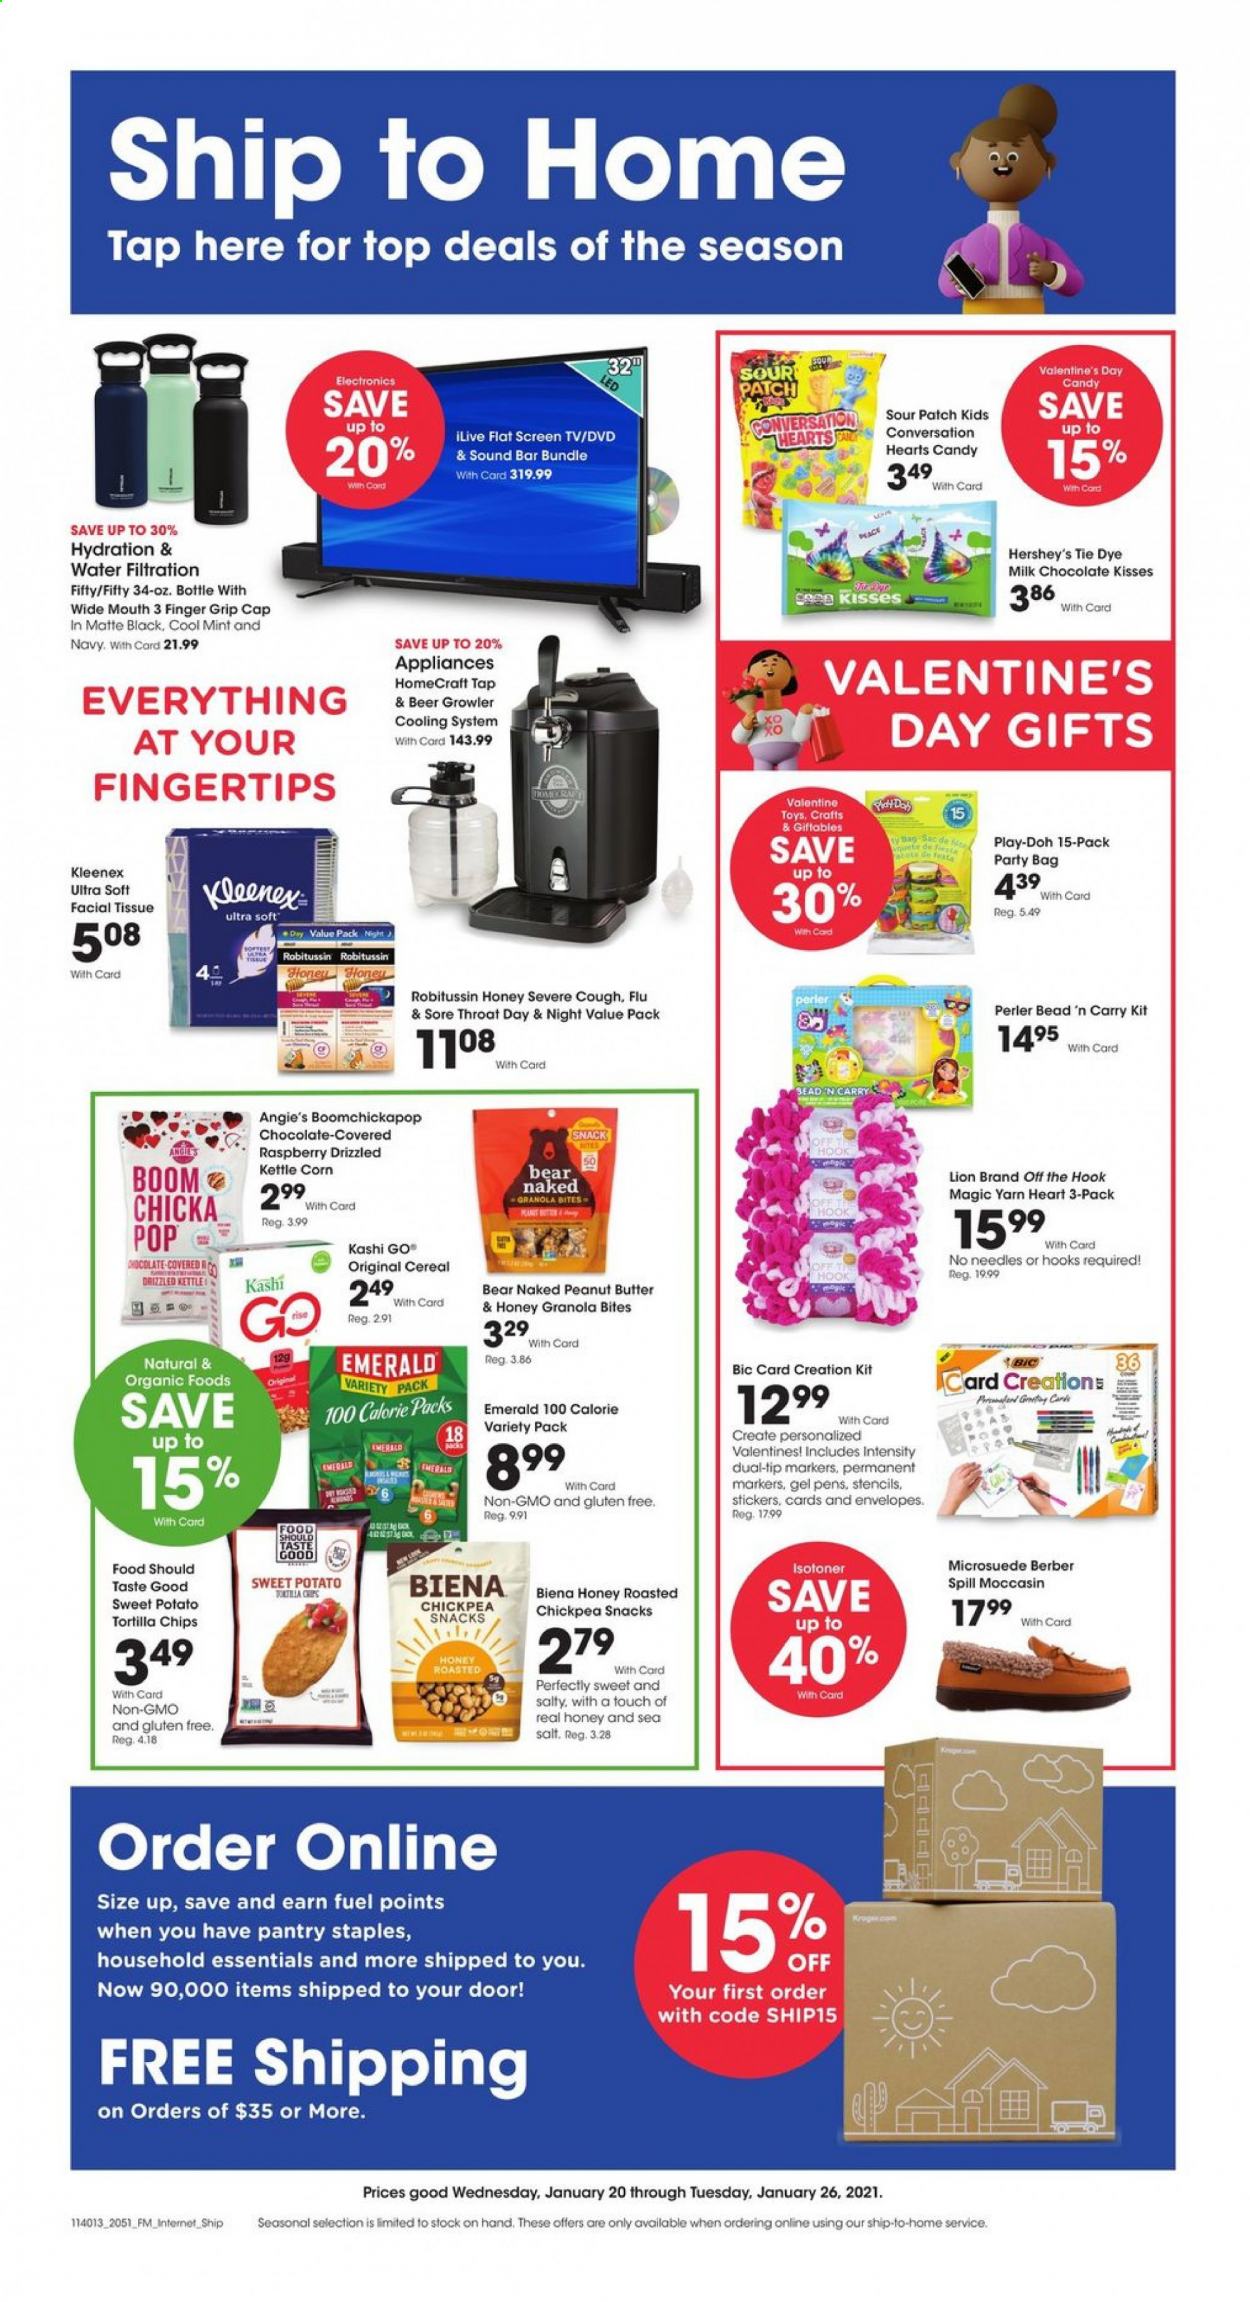 thumbnail - Baker's Flyer - 01/20/2021 - 01/26/2021 - Sales products - Hershey's, sweet potato, milk chocolate, chocolate, Sour Patch, tortilla chips, kettle corn, chips, snack, sea salt, cereals, granola, honey, peanut butter, beer, Kleenex, tissues, Ace, BIC, hook, sticker, envelope, water filter, TV, sound bar, kettle, Play-doh, toys, Robitussin. Page 1.